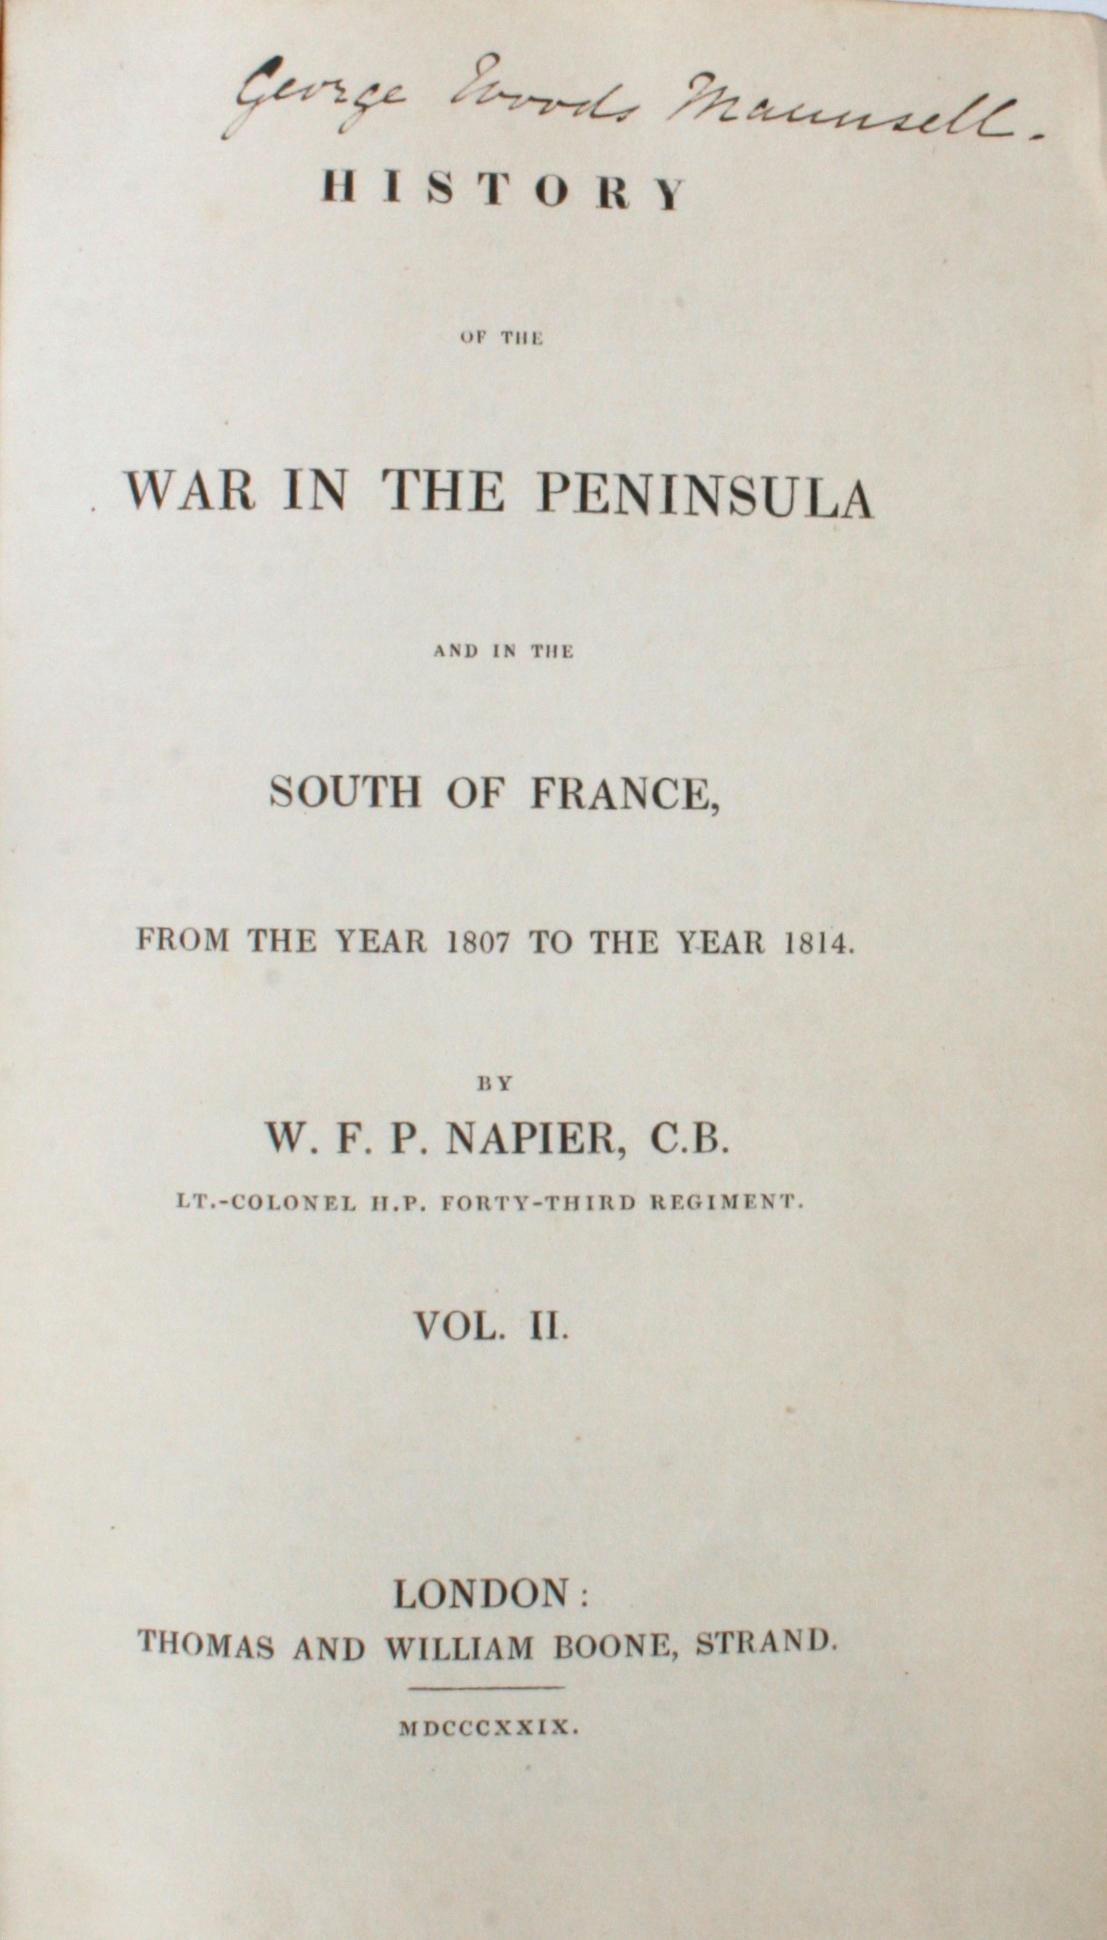 19th Century History of the War in the Peninsula by W.F.P. Napier with Lord Elgin Provenance For Sale